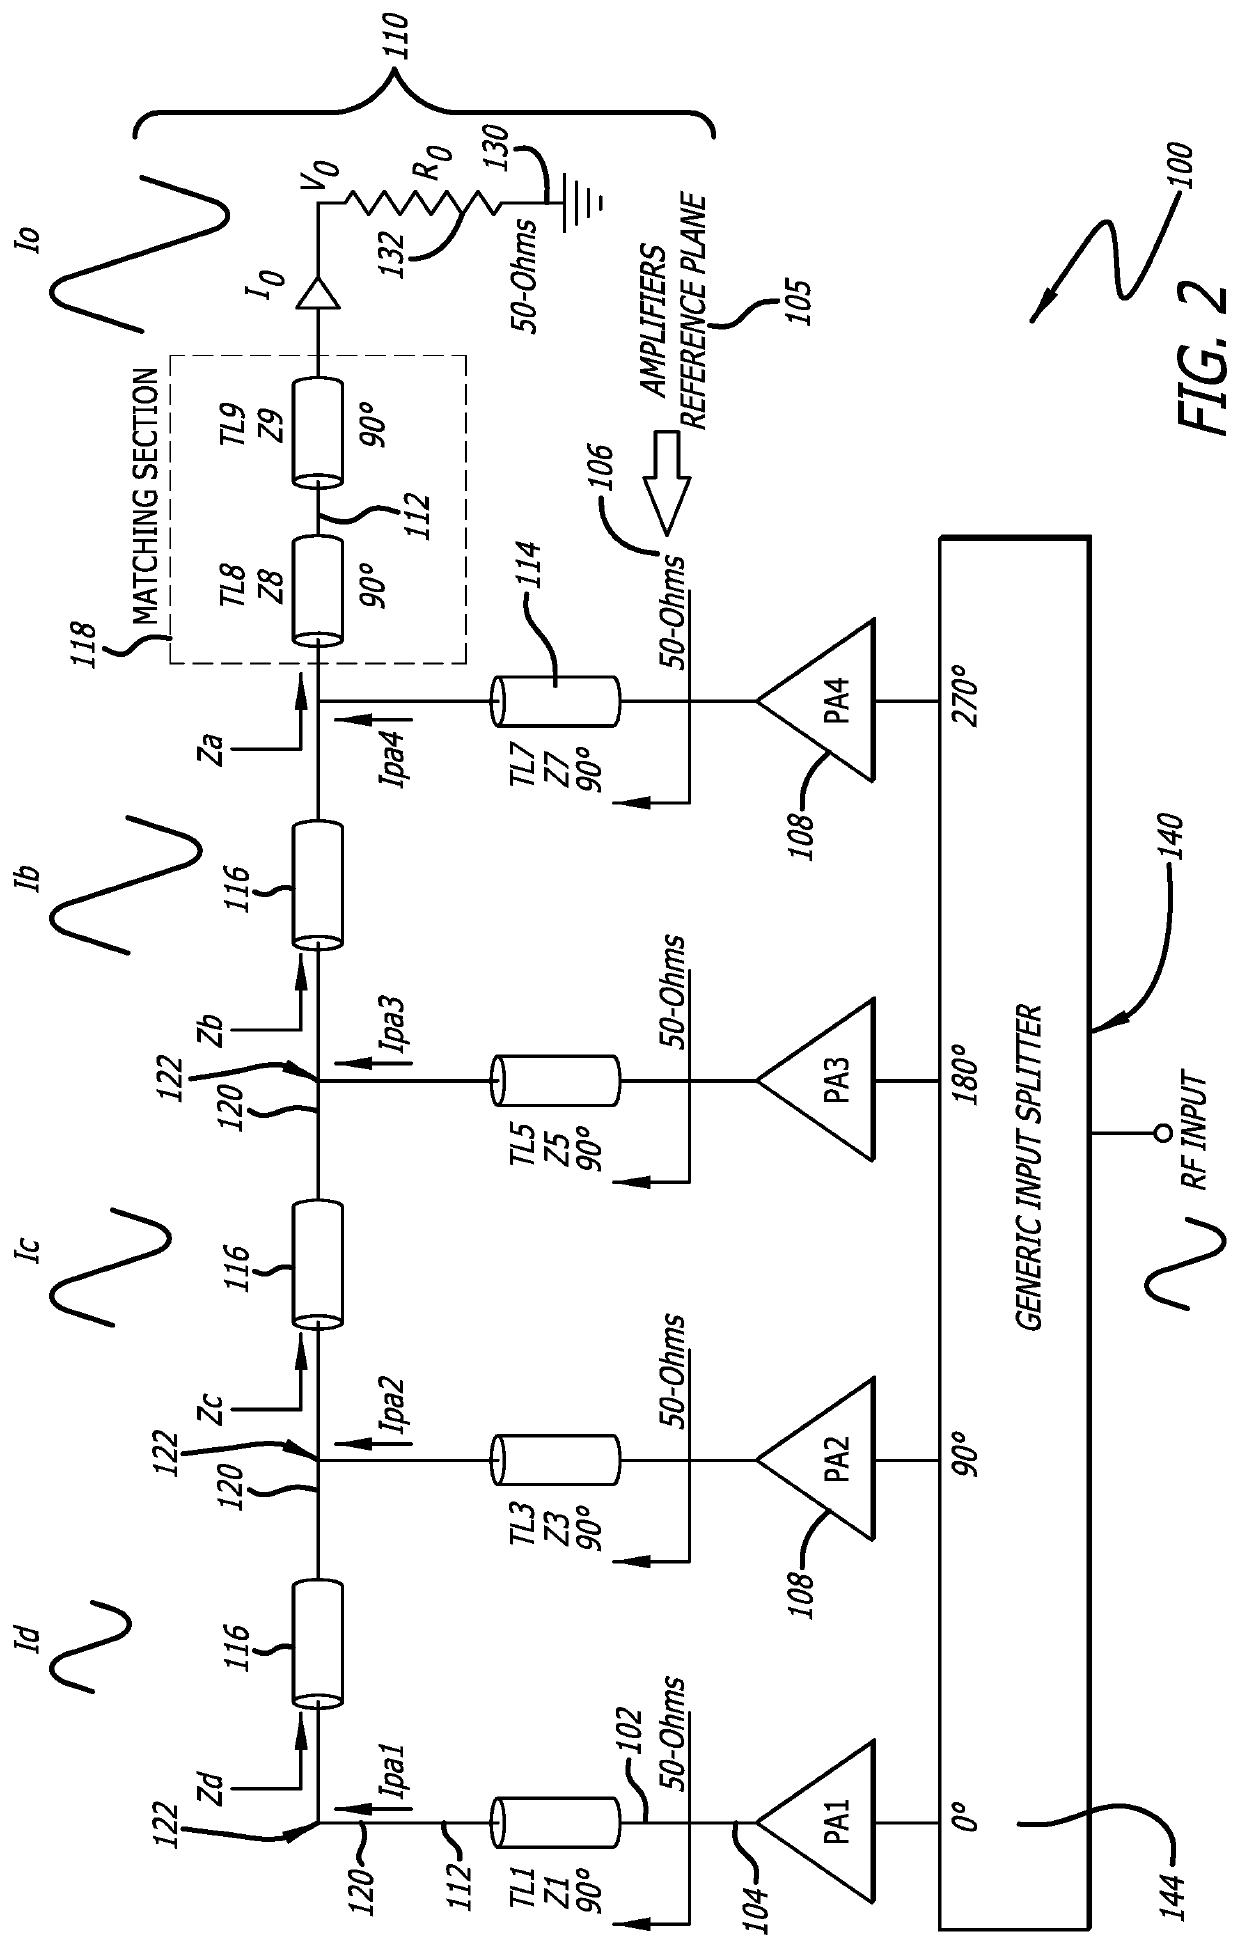 Microwave and radio frequency (RF) power electronics system having power combiner circuit